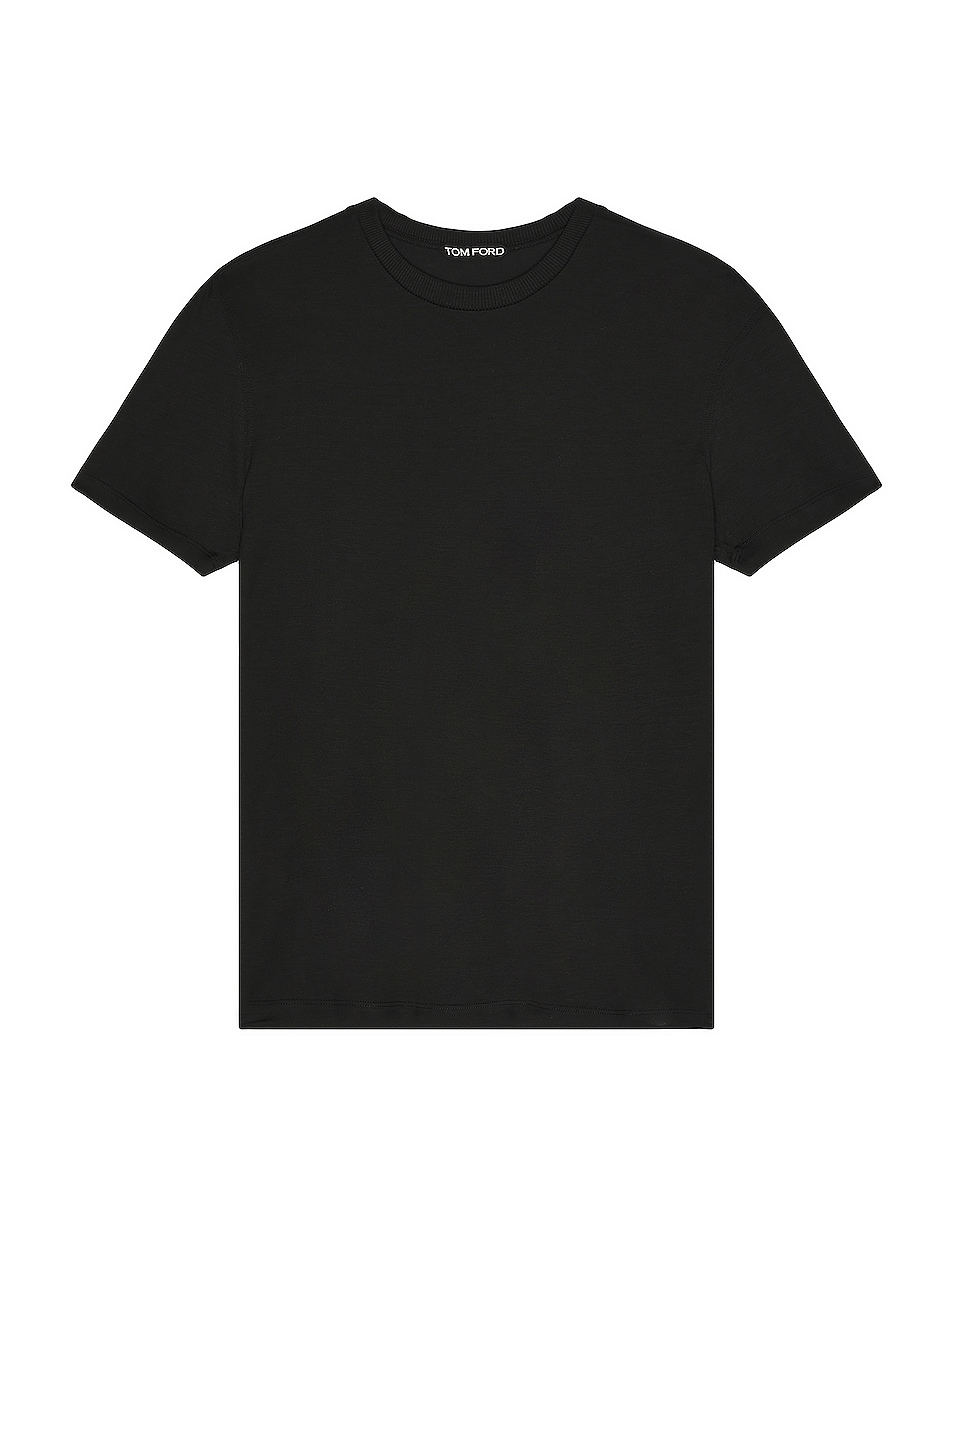 Image 1 of TOM FORD Short Sleeve T-Shirt in Black